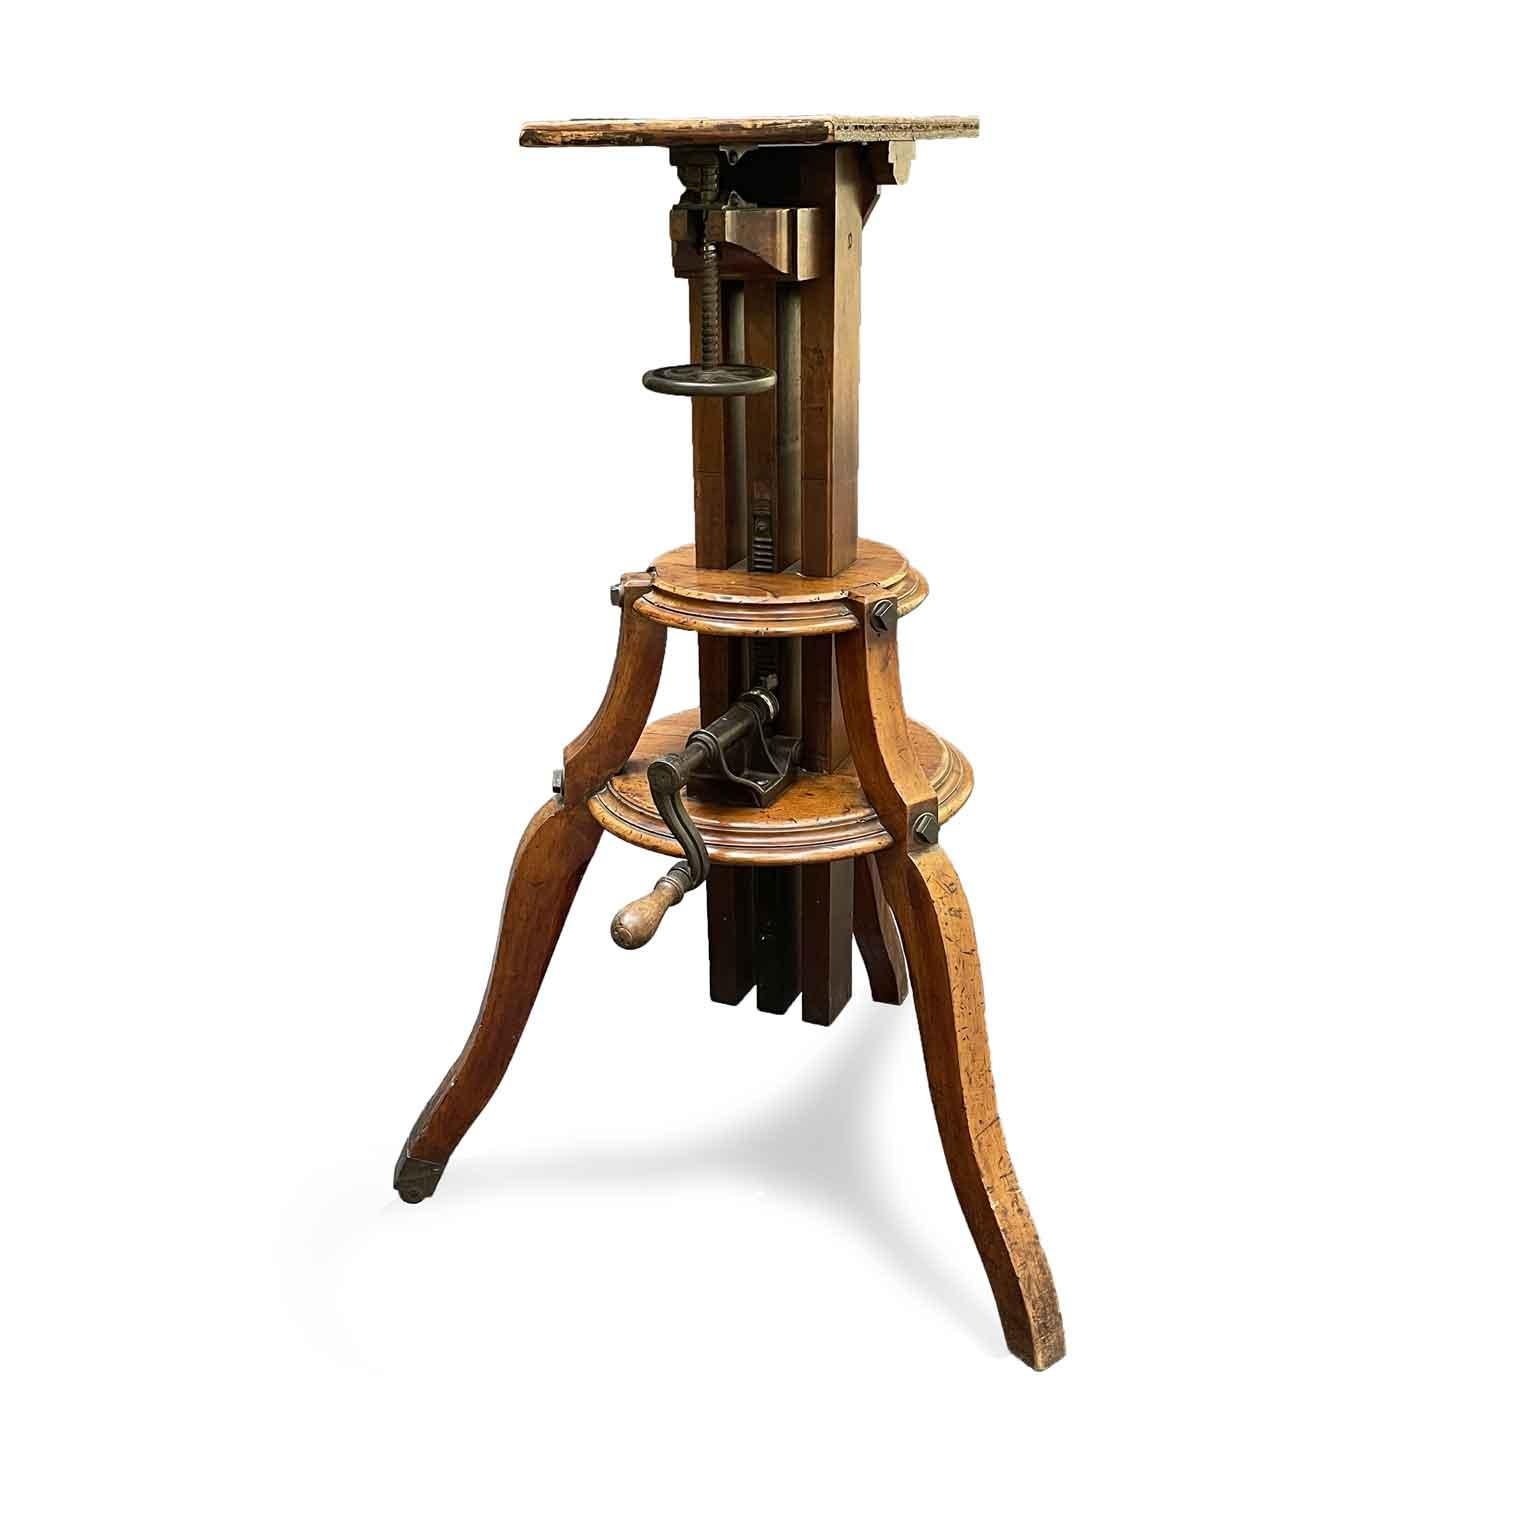 Early 20th century three-legged solid wood and iron camera stand, features a fully adjustable platform top that could be tilted up or be fixed as a flat surface and moved upward and downward by turning the oversized iron wheels which allows you to